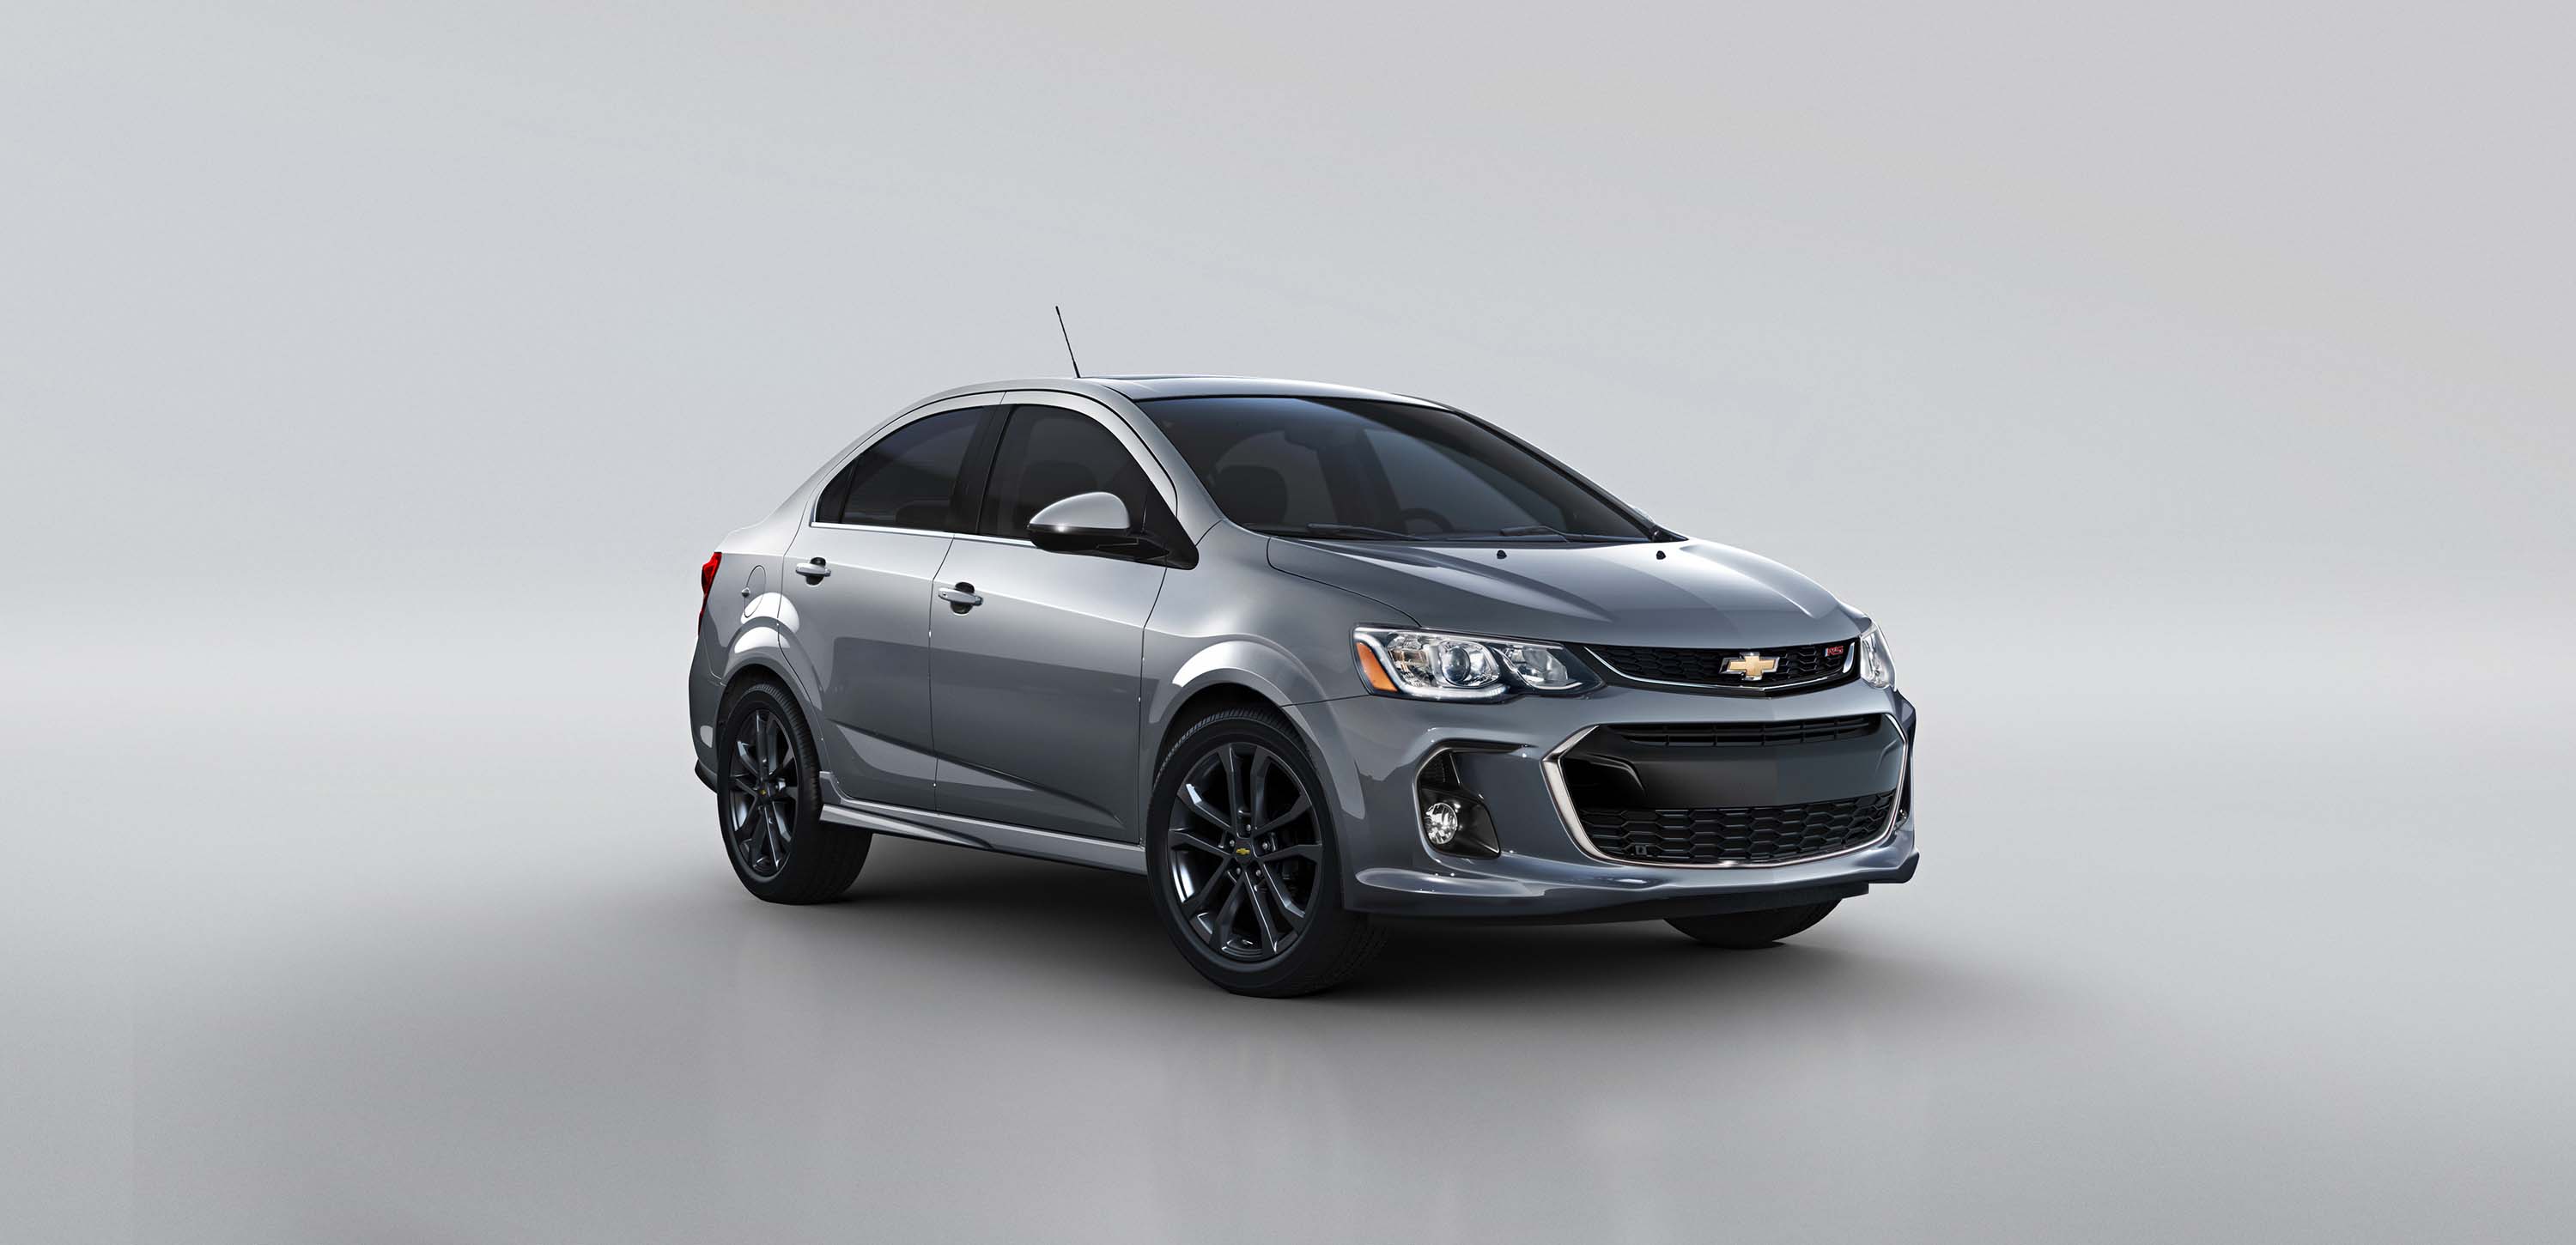 2019 Chevrolet Sonic (Chevy) Review, Ratings, Specs, Prices, and Photos -  The Car Connection